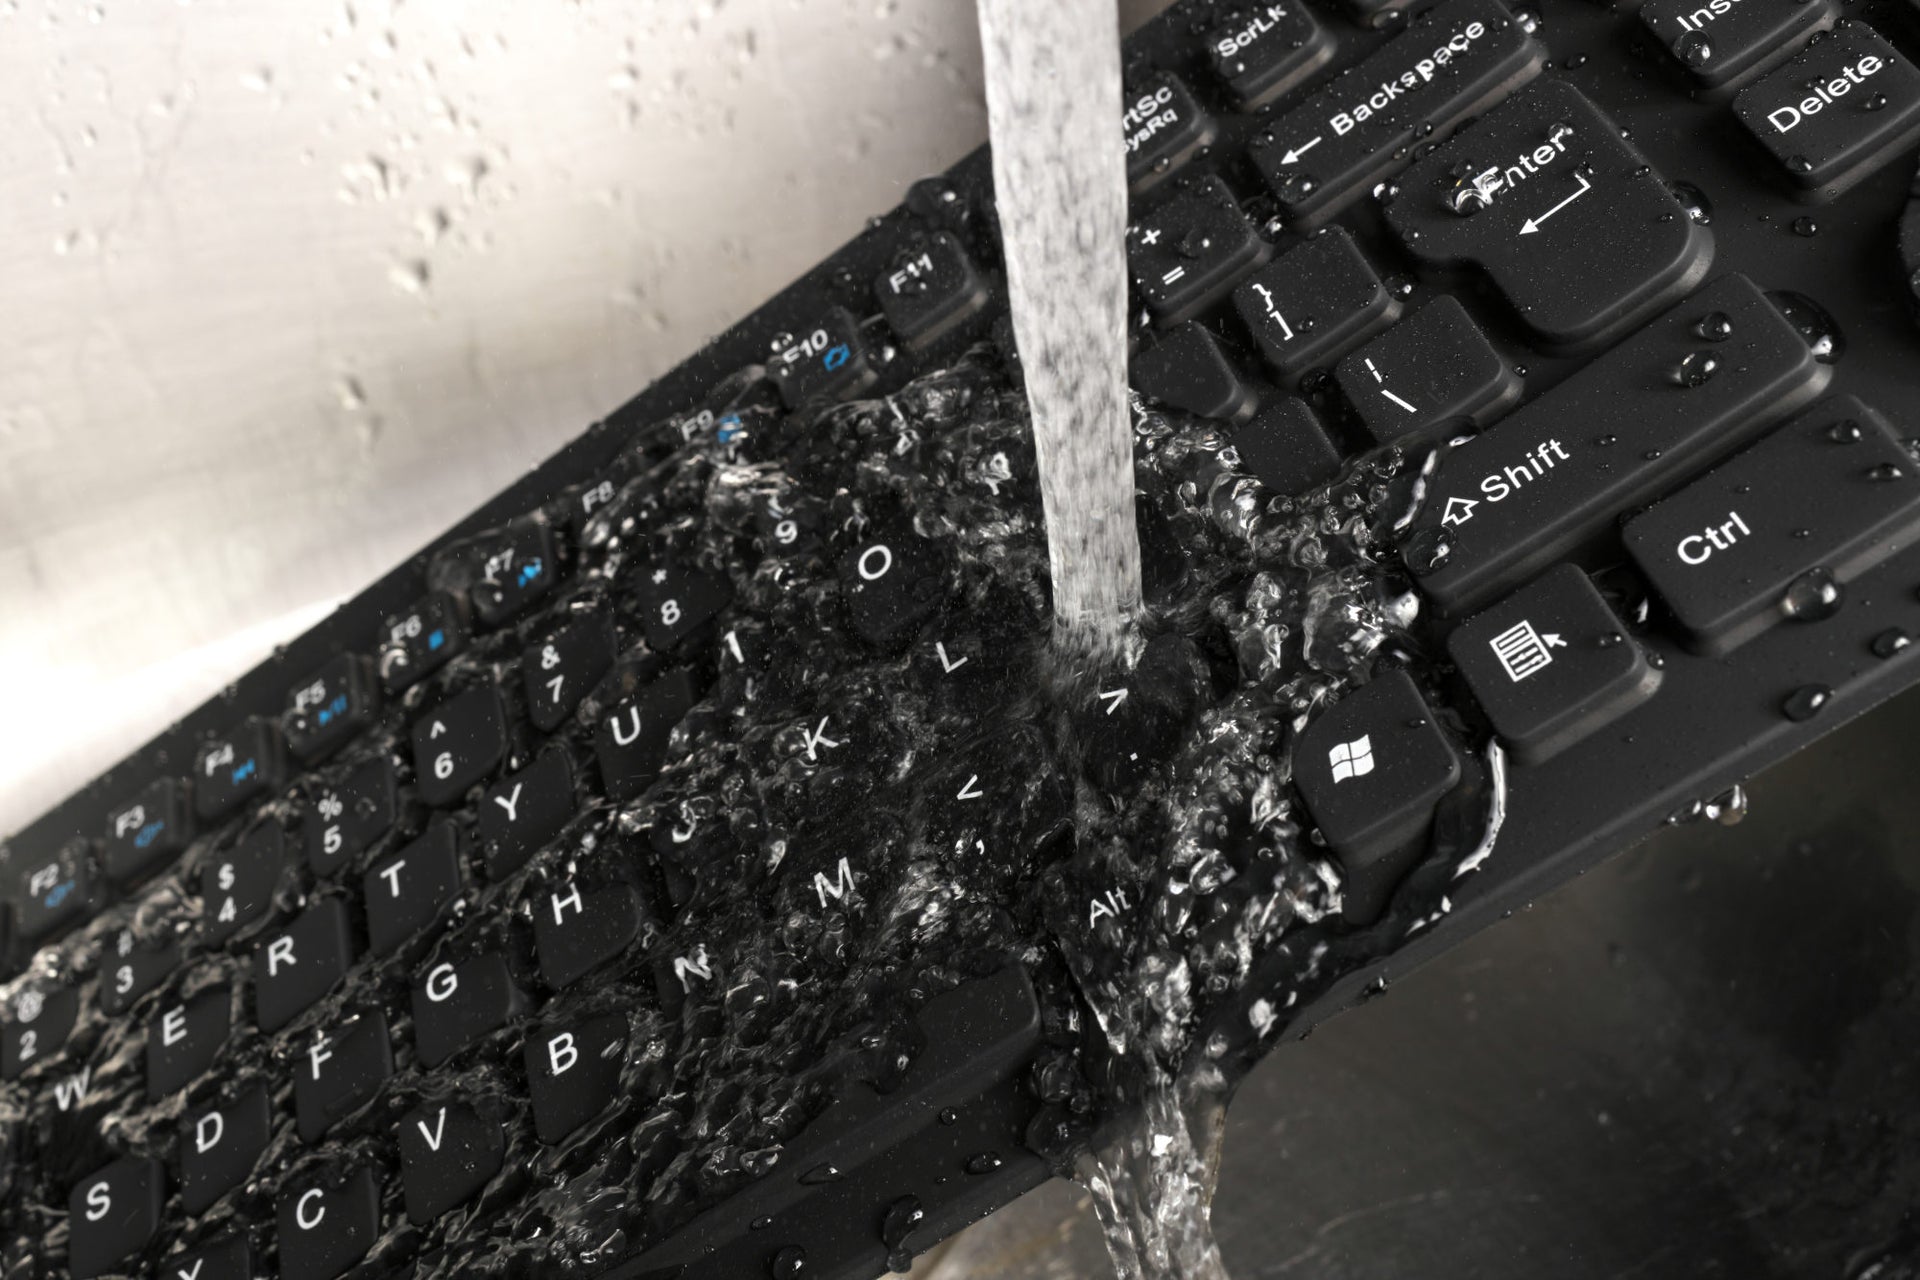 Load video: Learn about Kleen Keys washable keyboards and mice that can be easily disinfected.  Great for medical, residential and industrial use.  libraries, dental offices, labs and homes. Help prevent the spread of germs and viruses.